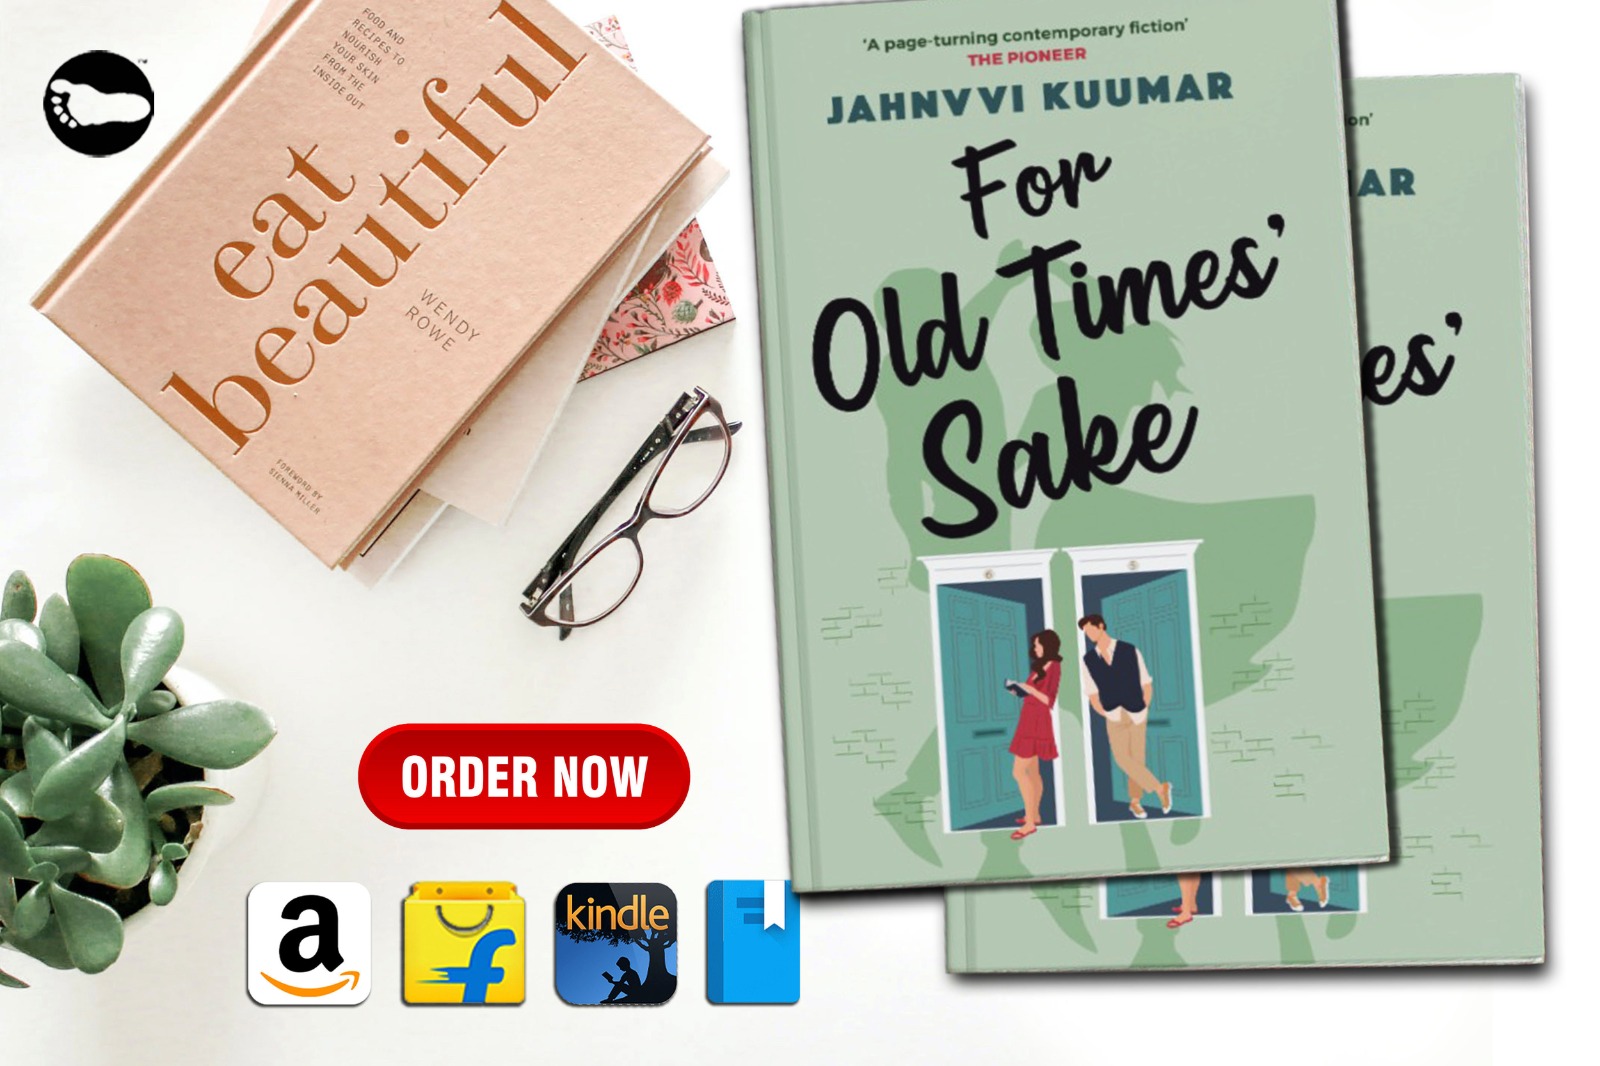 REVIEW OF ‘FOR OLD TIMES’ SAKE’ BY JAHNVVI KUUMAR